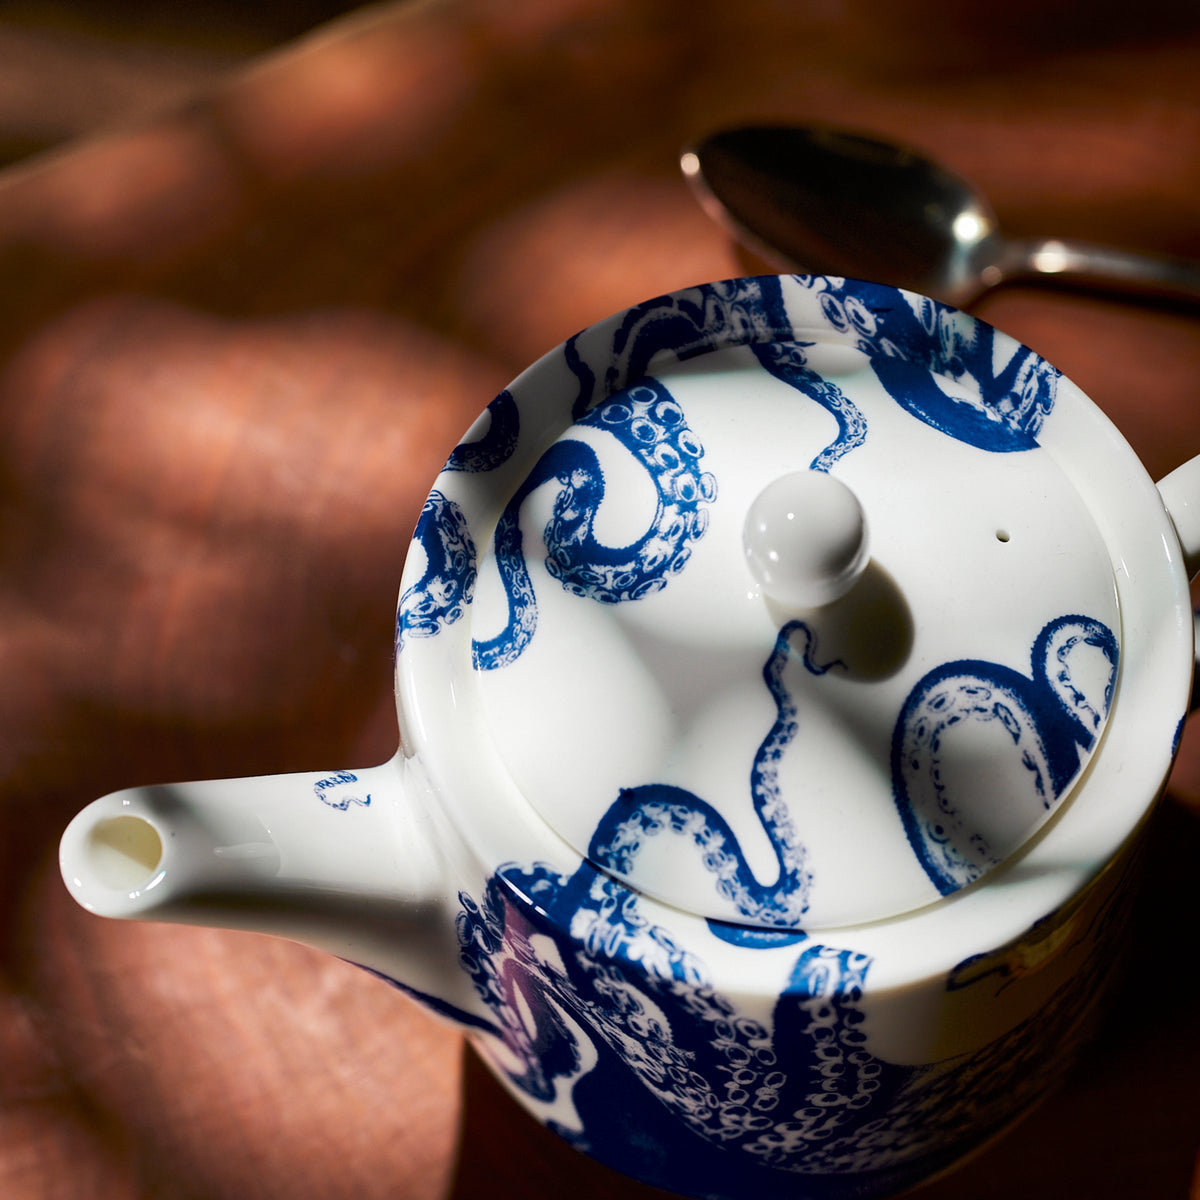 A Lucy Petite Teapot by Caskata with a deepwater whimsy octopus design.